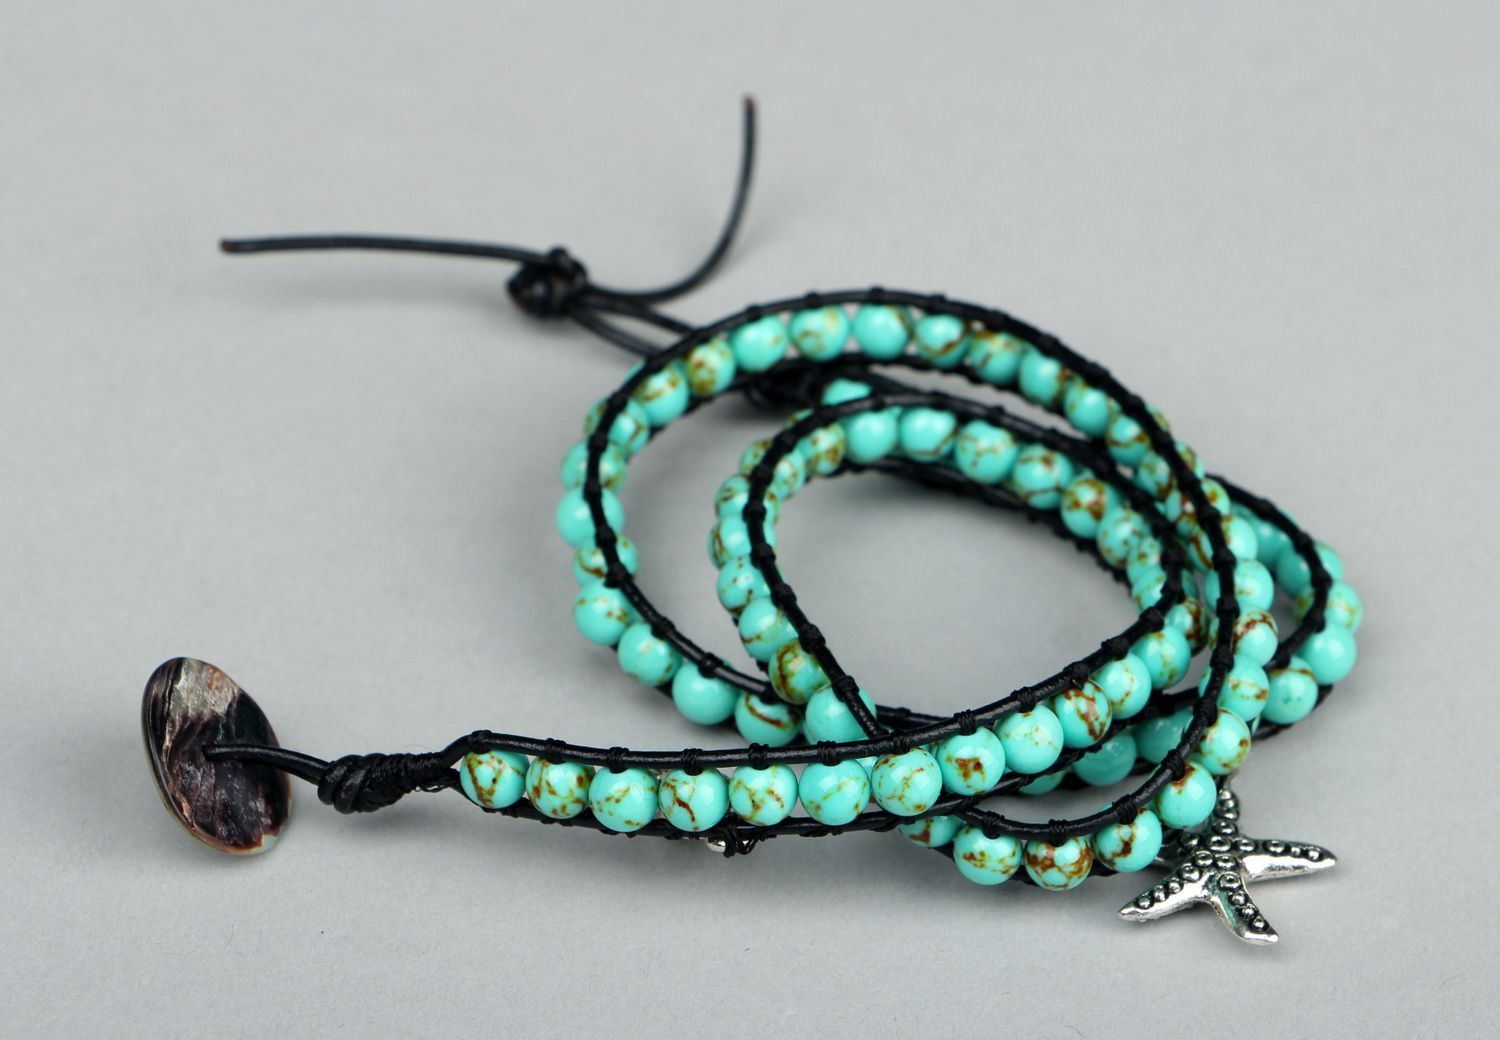 Bracelet made of turquoise stones and leather photo 2